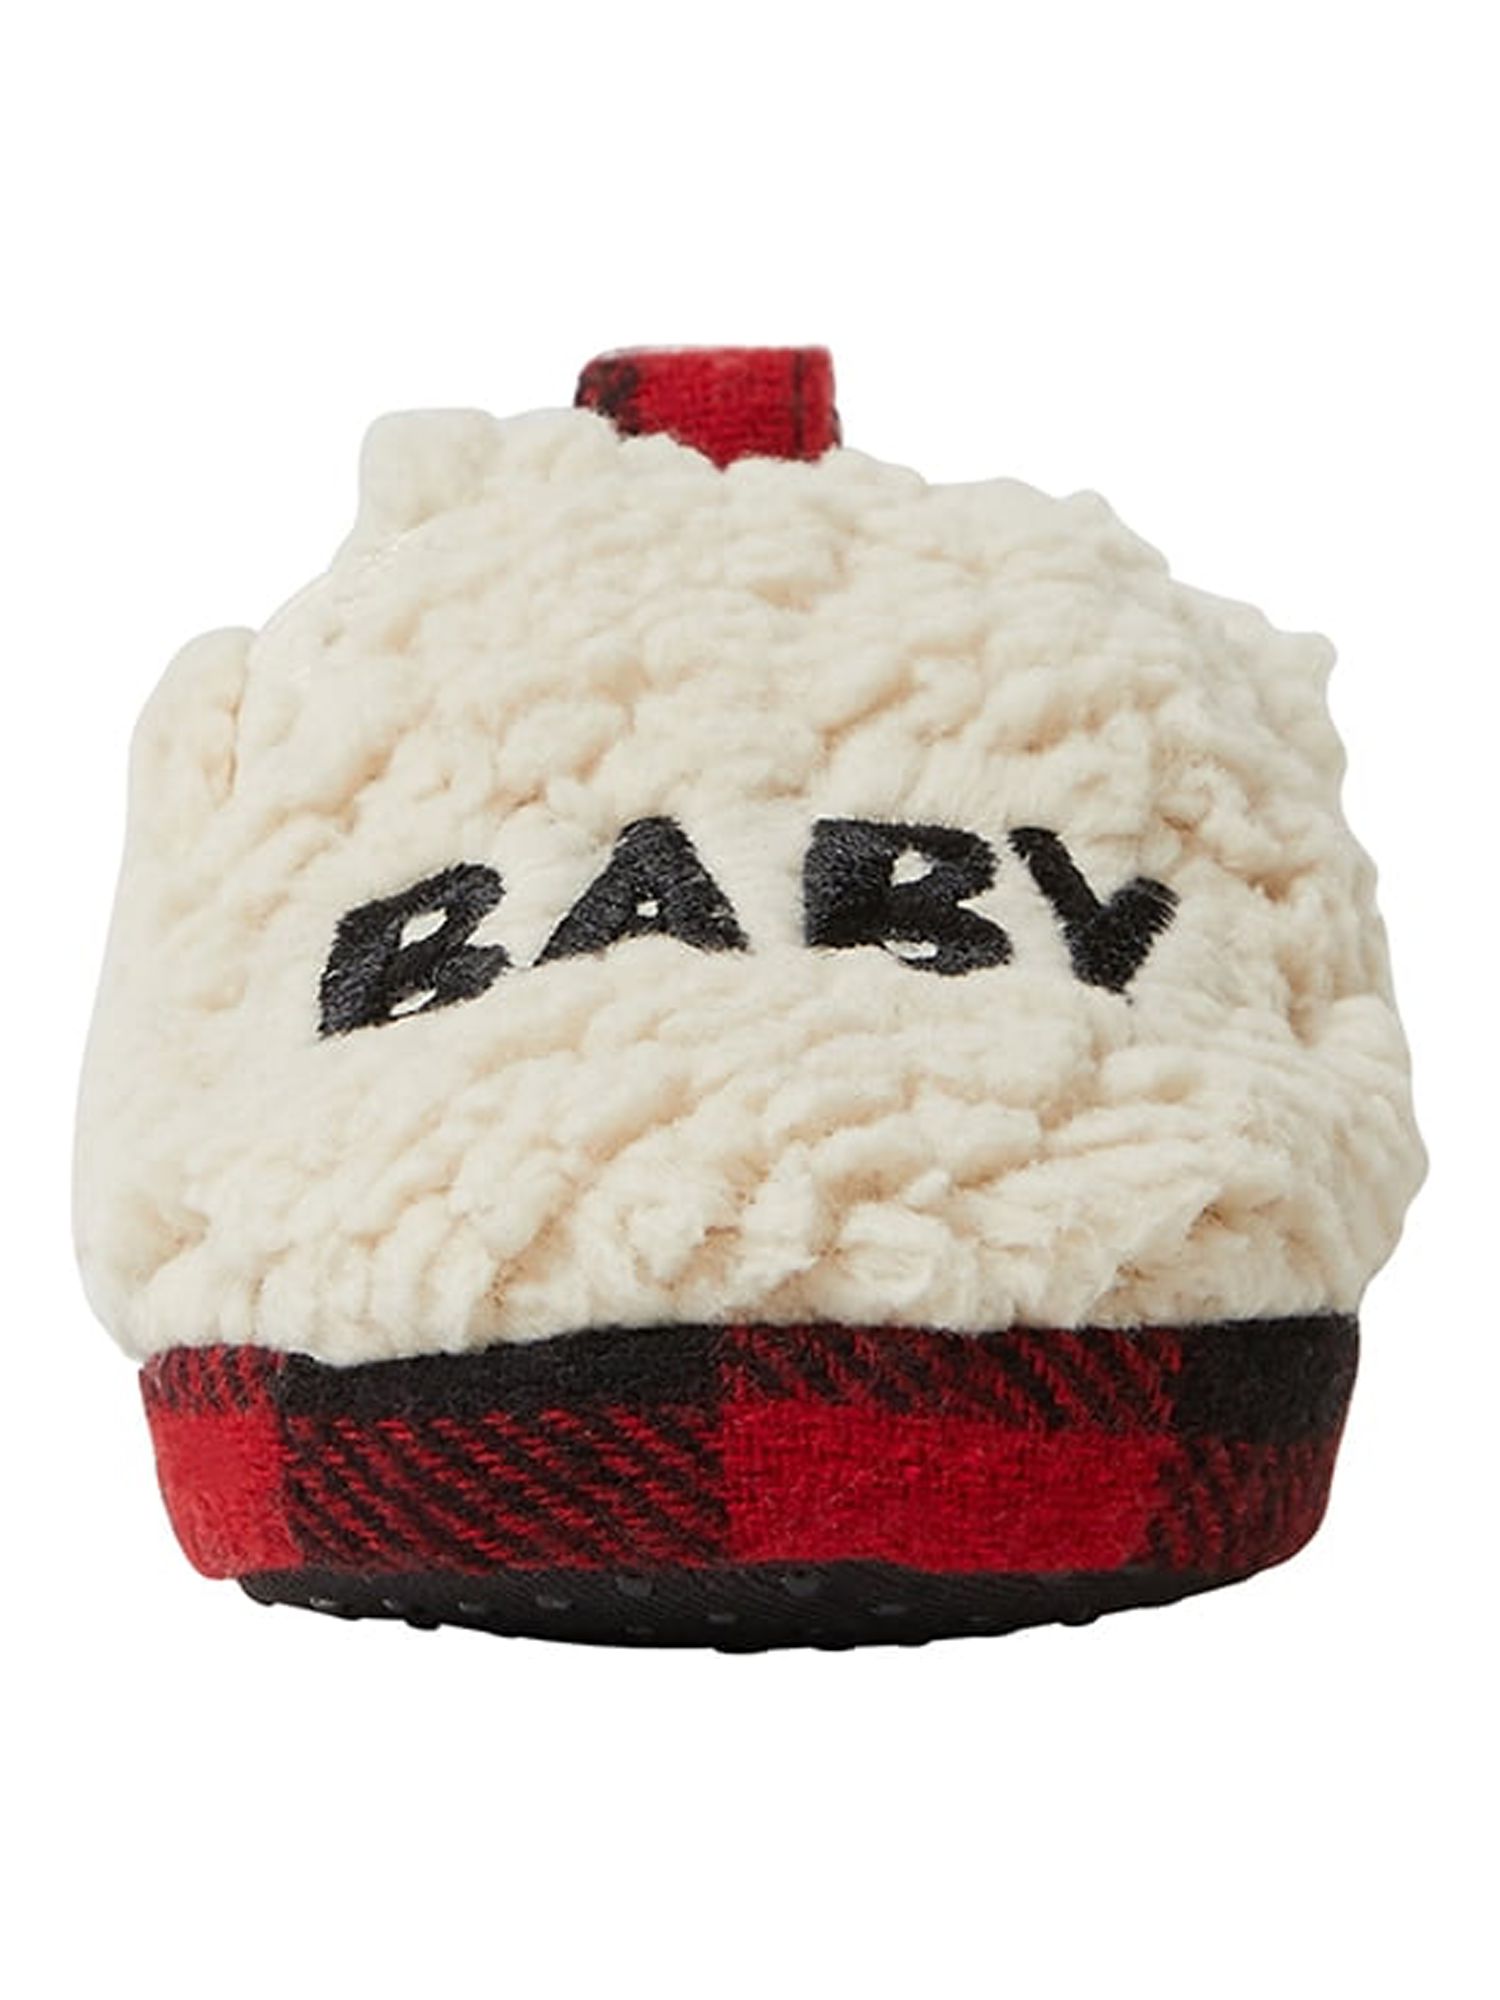 DF by Dearfoams Baby Bear Closed Back slippers - image 3 of 6